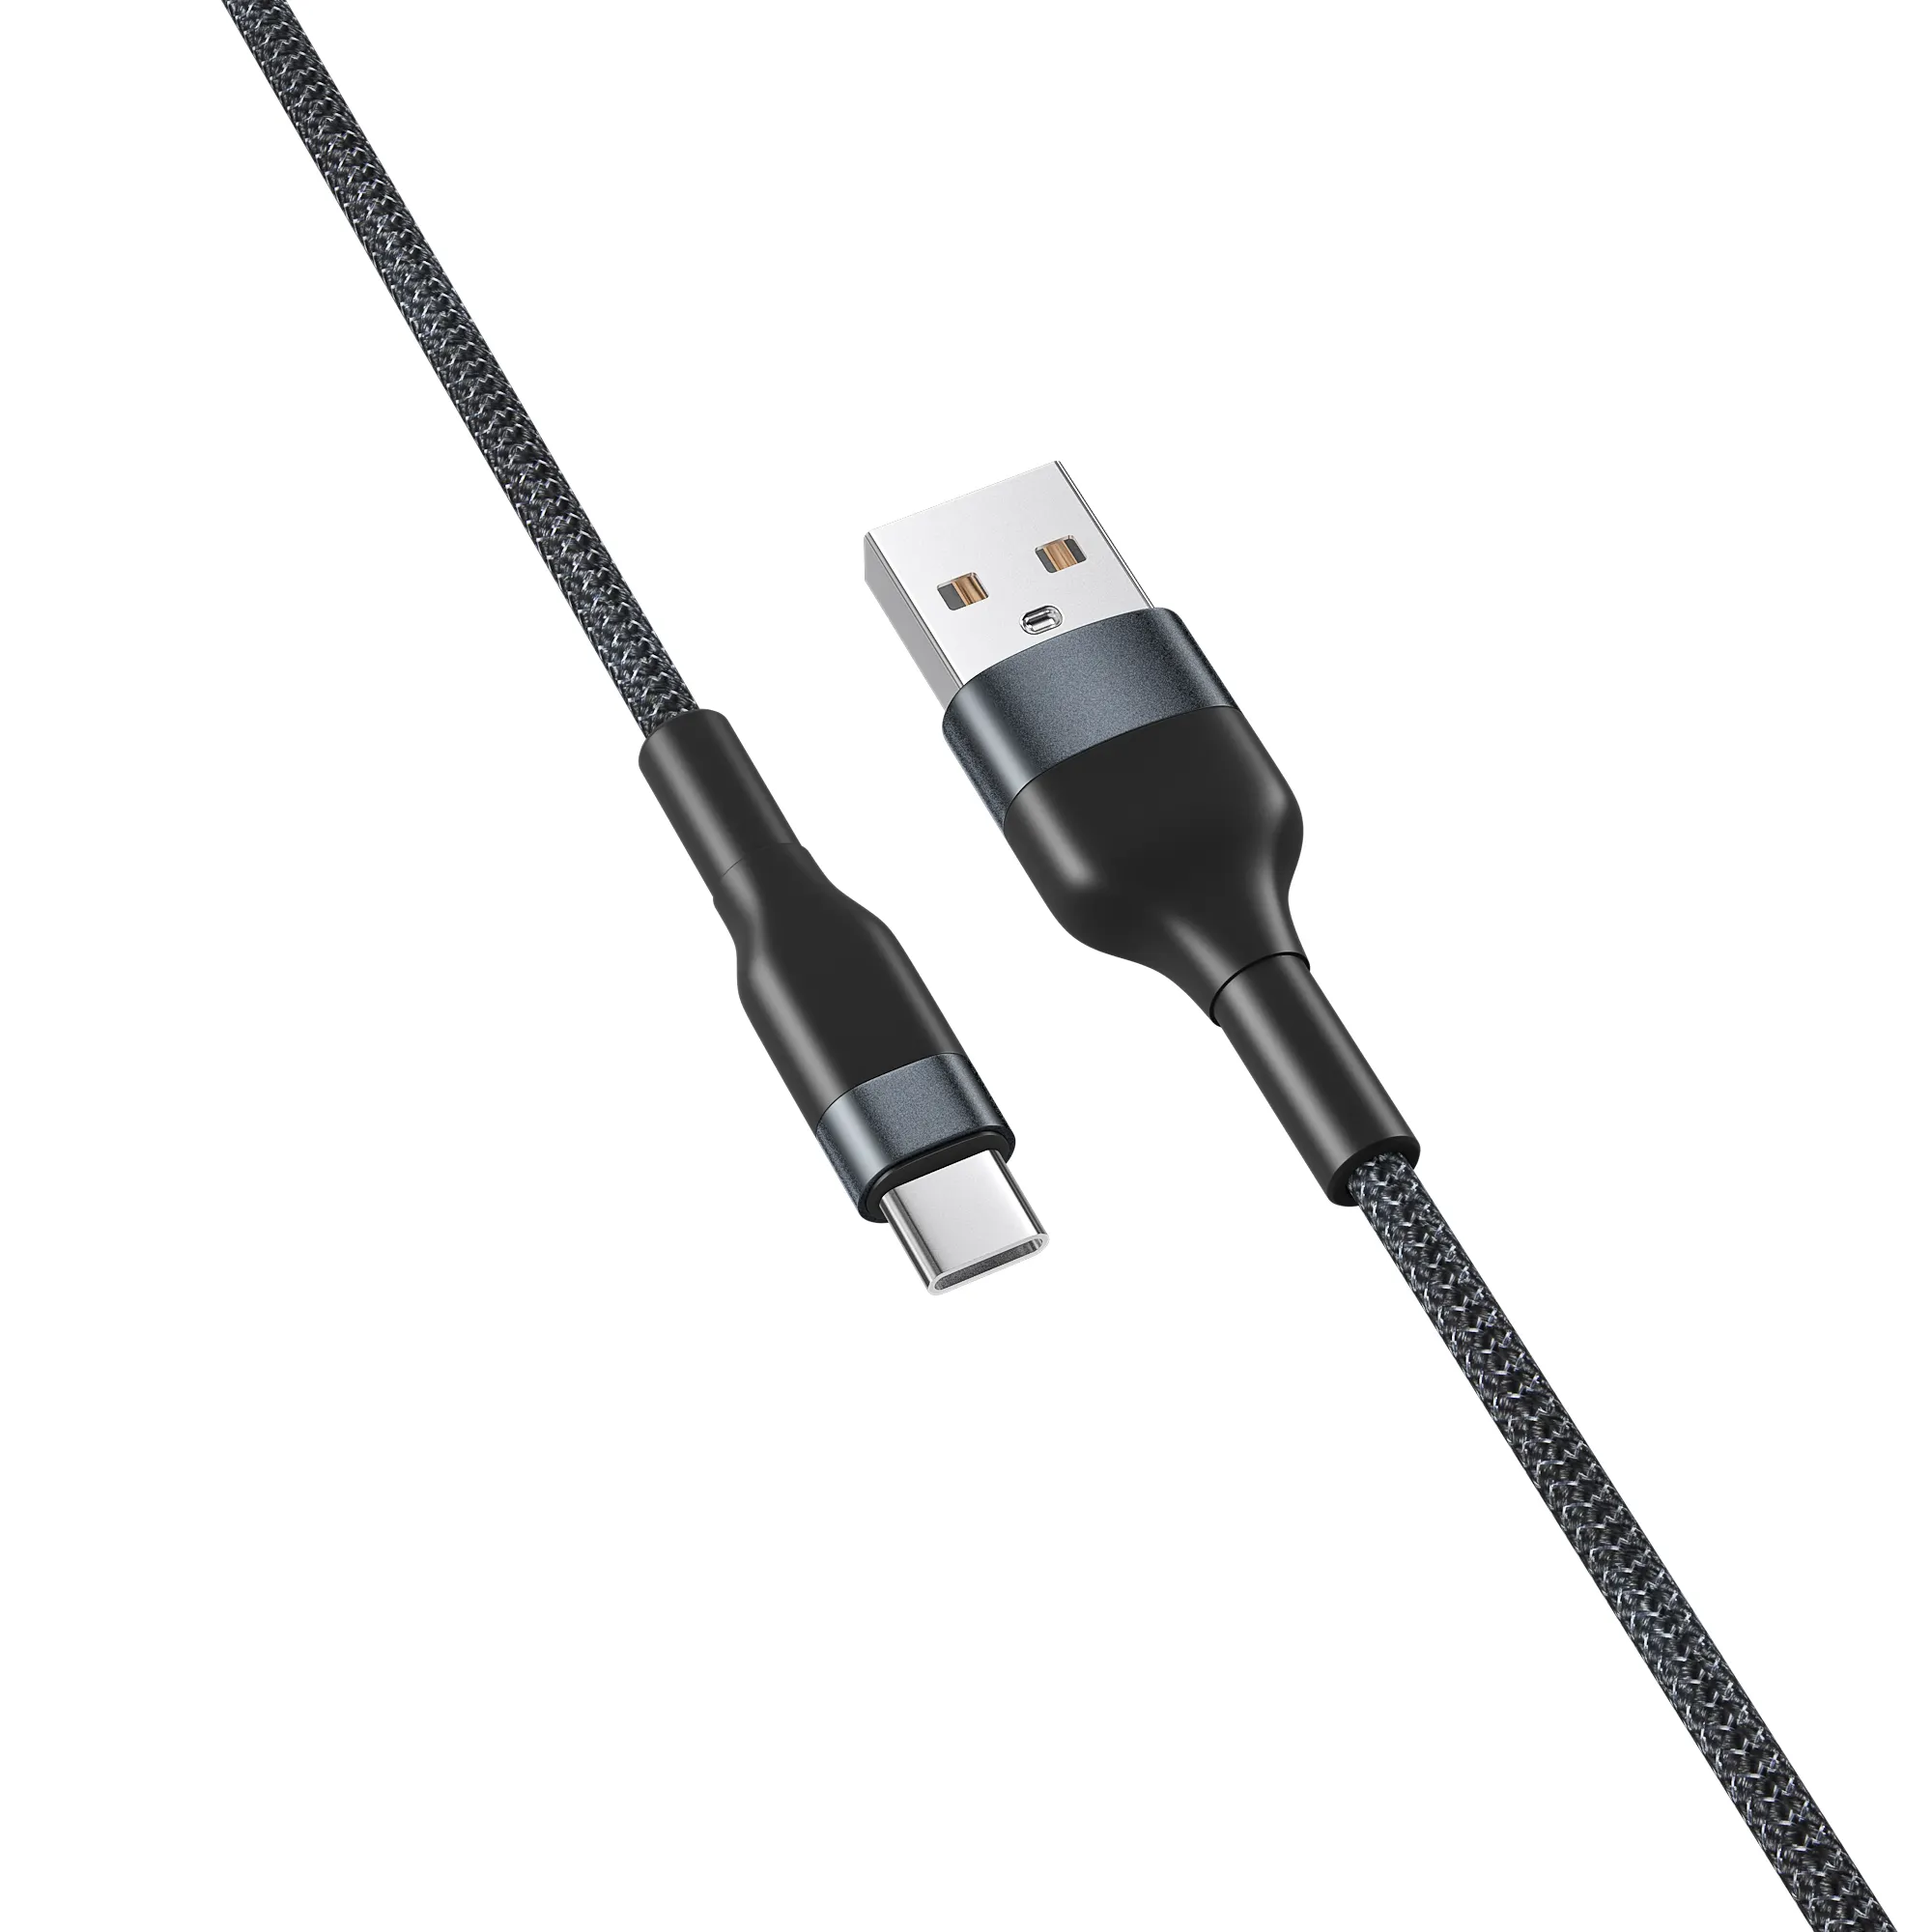 High Quality 0.3M 3A Fast Charging 5V USB C Cable black/grey Aluminum Alloy Shell SR Cover For Android Mobile Phone Type-C Cable